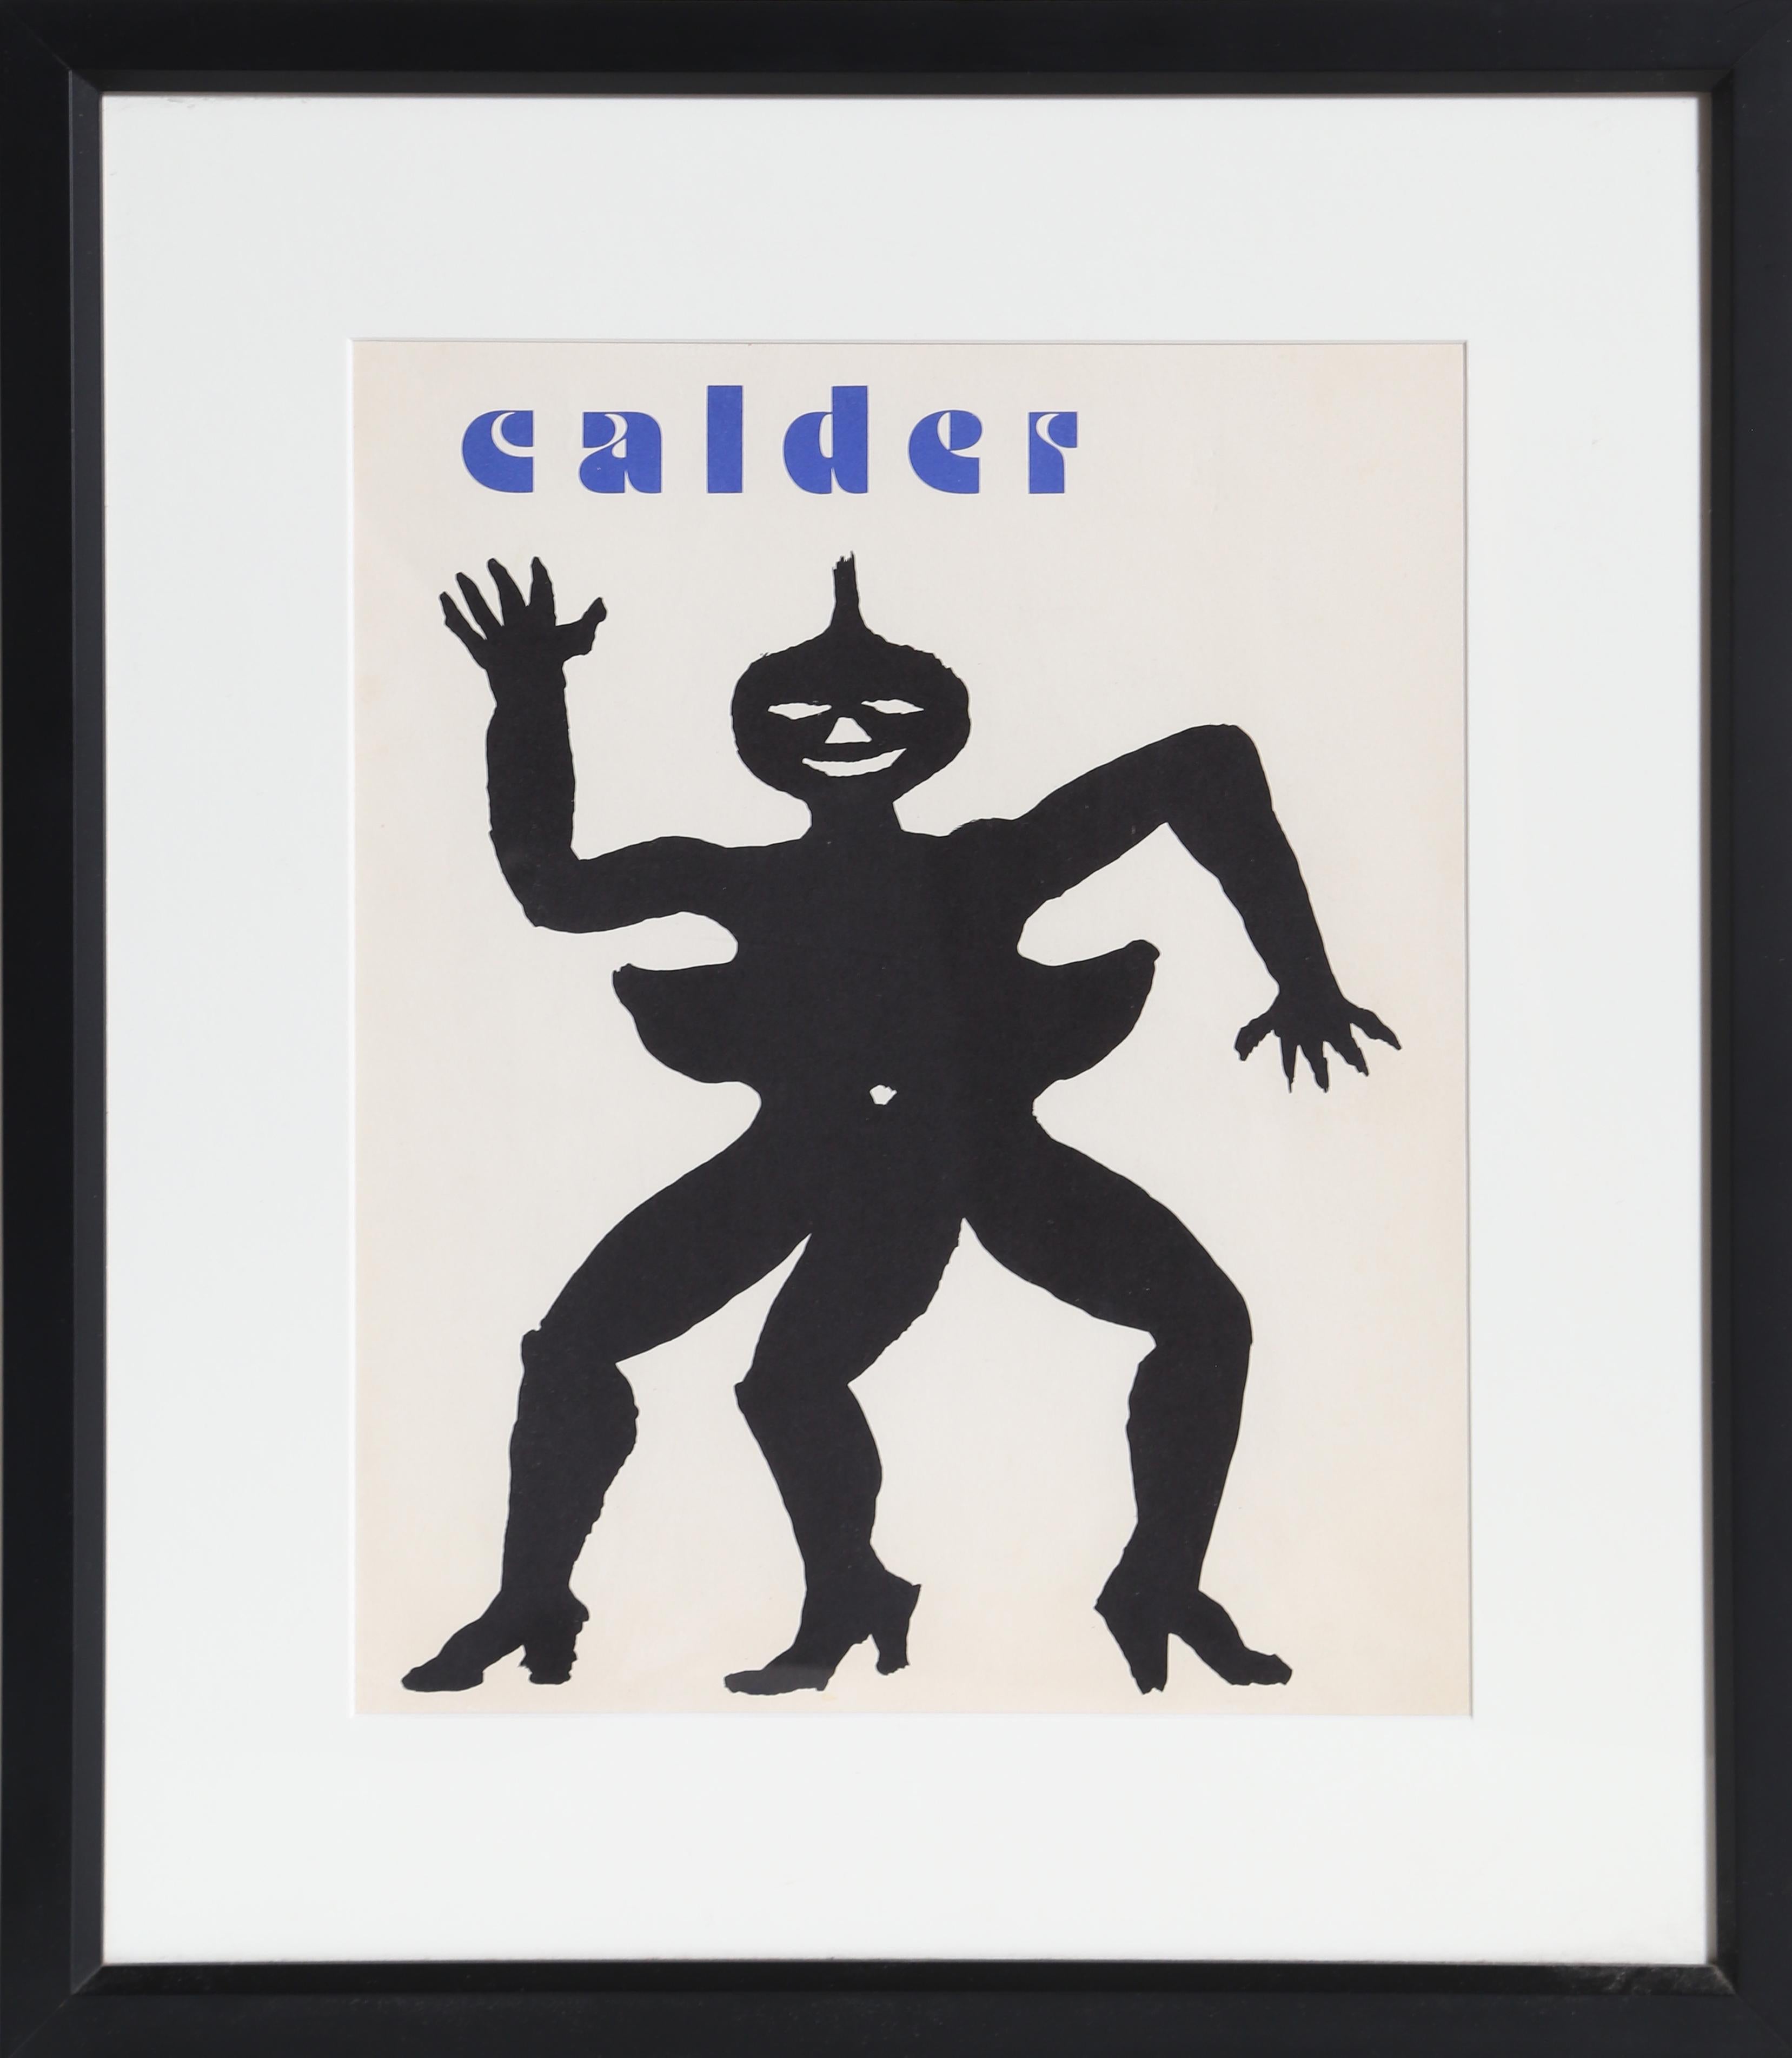 Artist: Alexander Calder, American (1898 - 1976)
Title: Derriere Le Miroir (Cover)
Year: 1975
Medium: Lithograph
Image Size: 15 x 22 inches
Frame Size: 23 x 30 inches